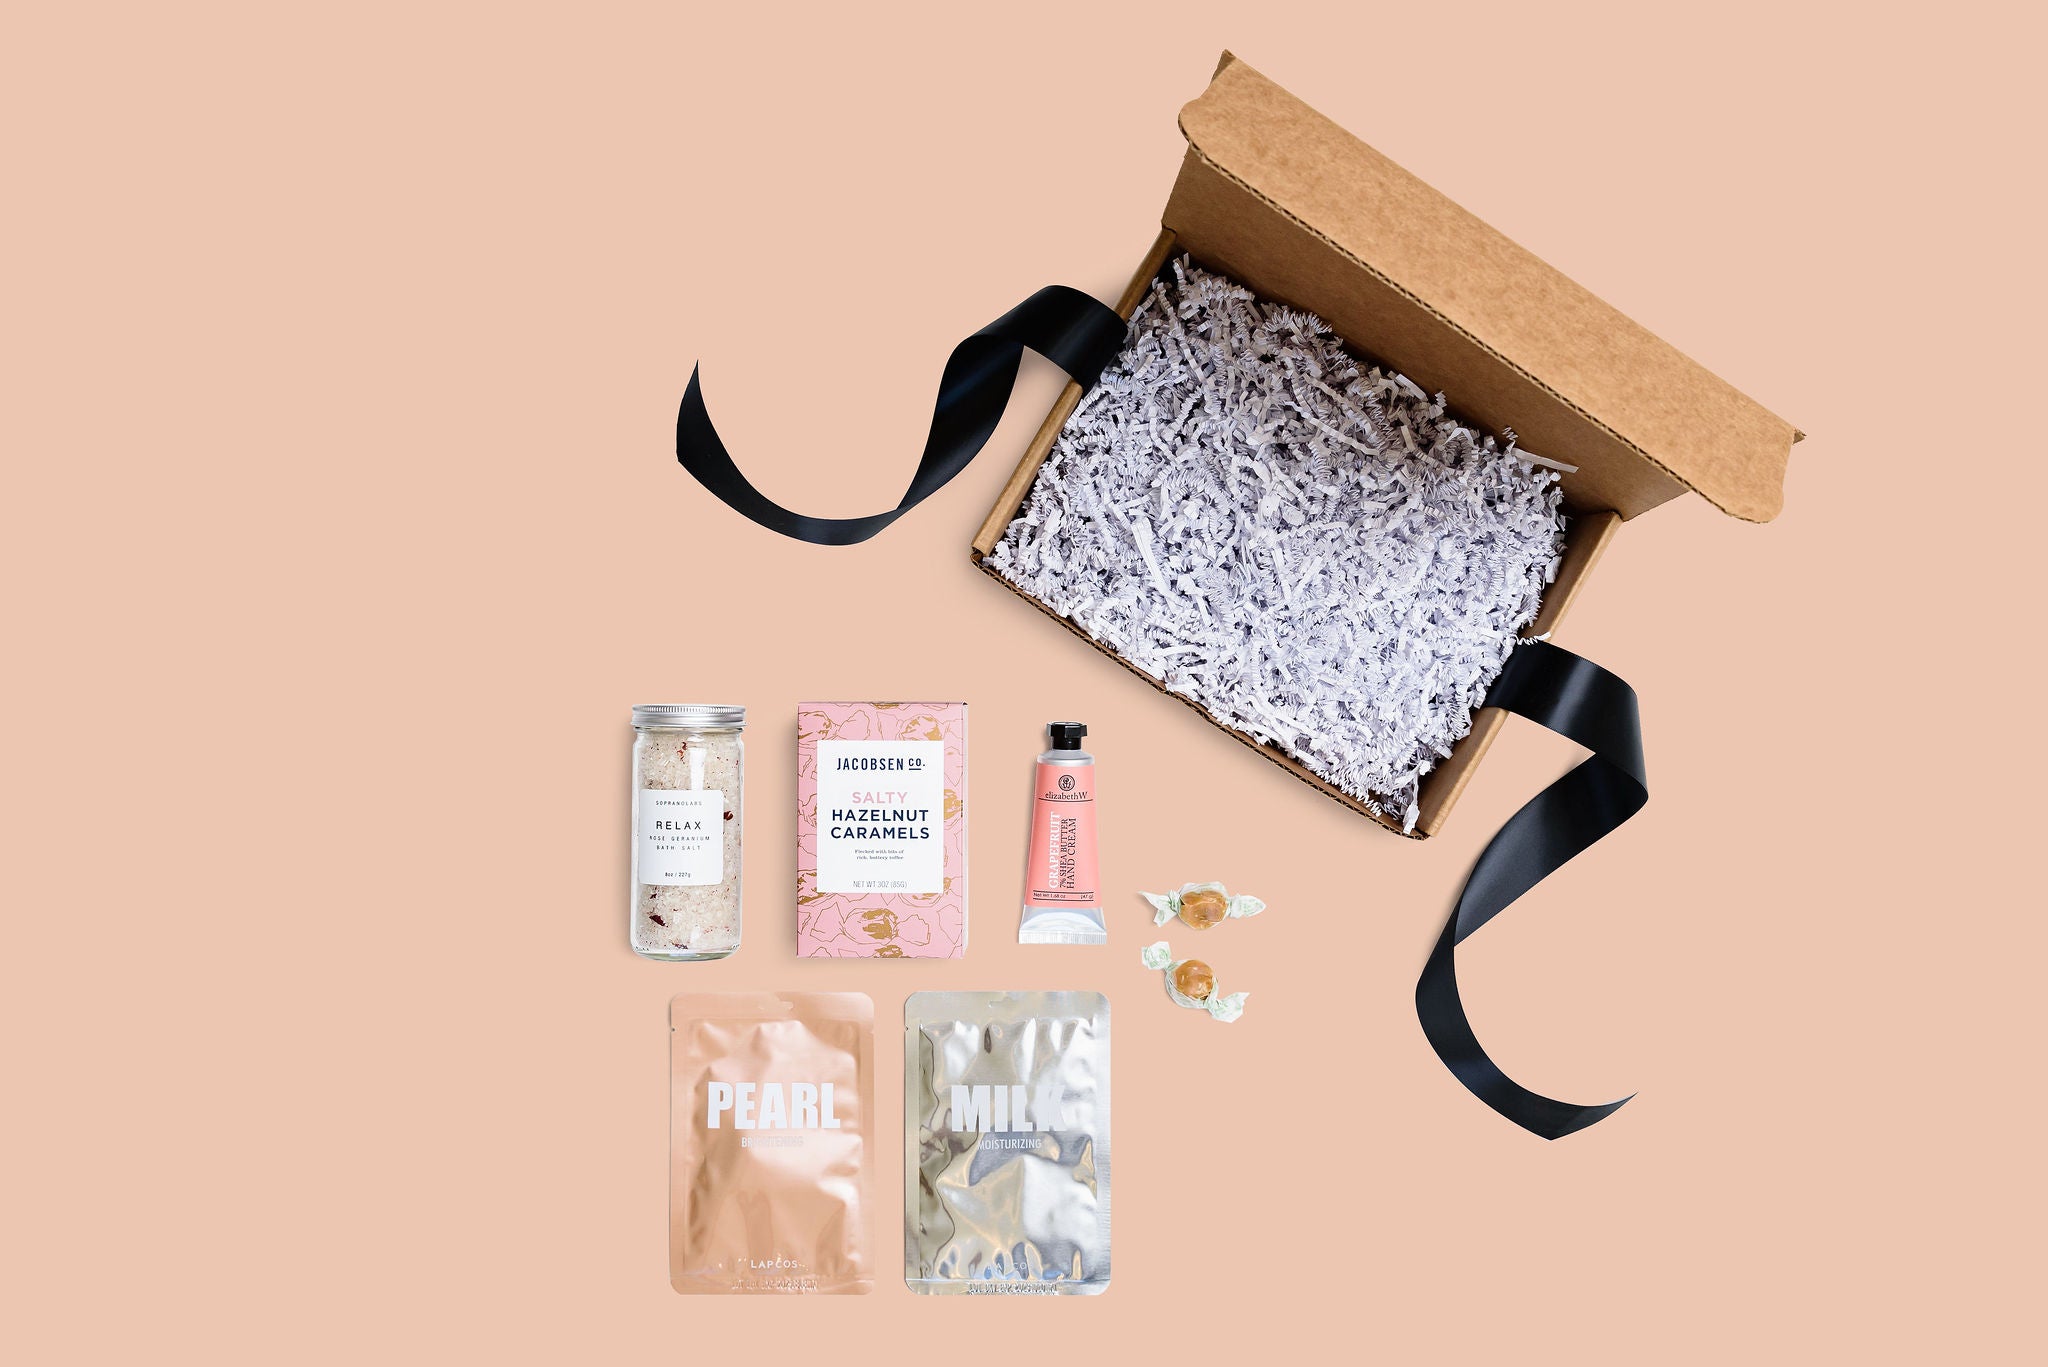 pamper me gift box items, pearl facemask, milk face mask, relax bath salts, salty hazelnuts caramels, hand cream